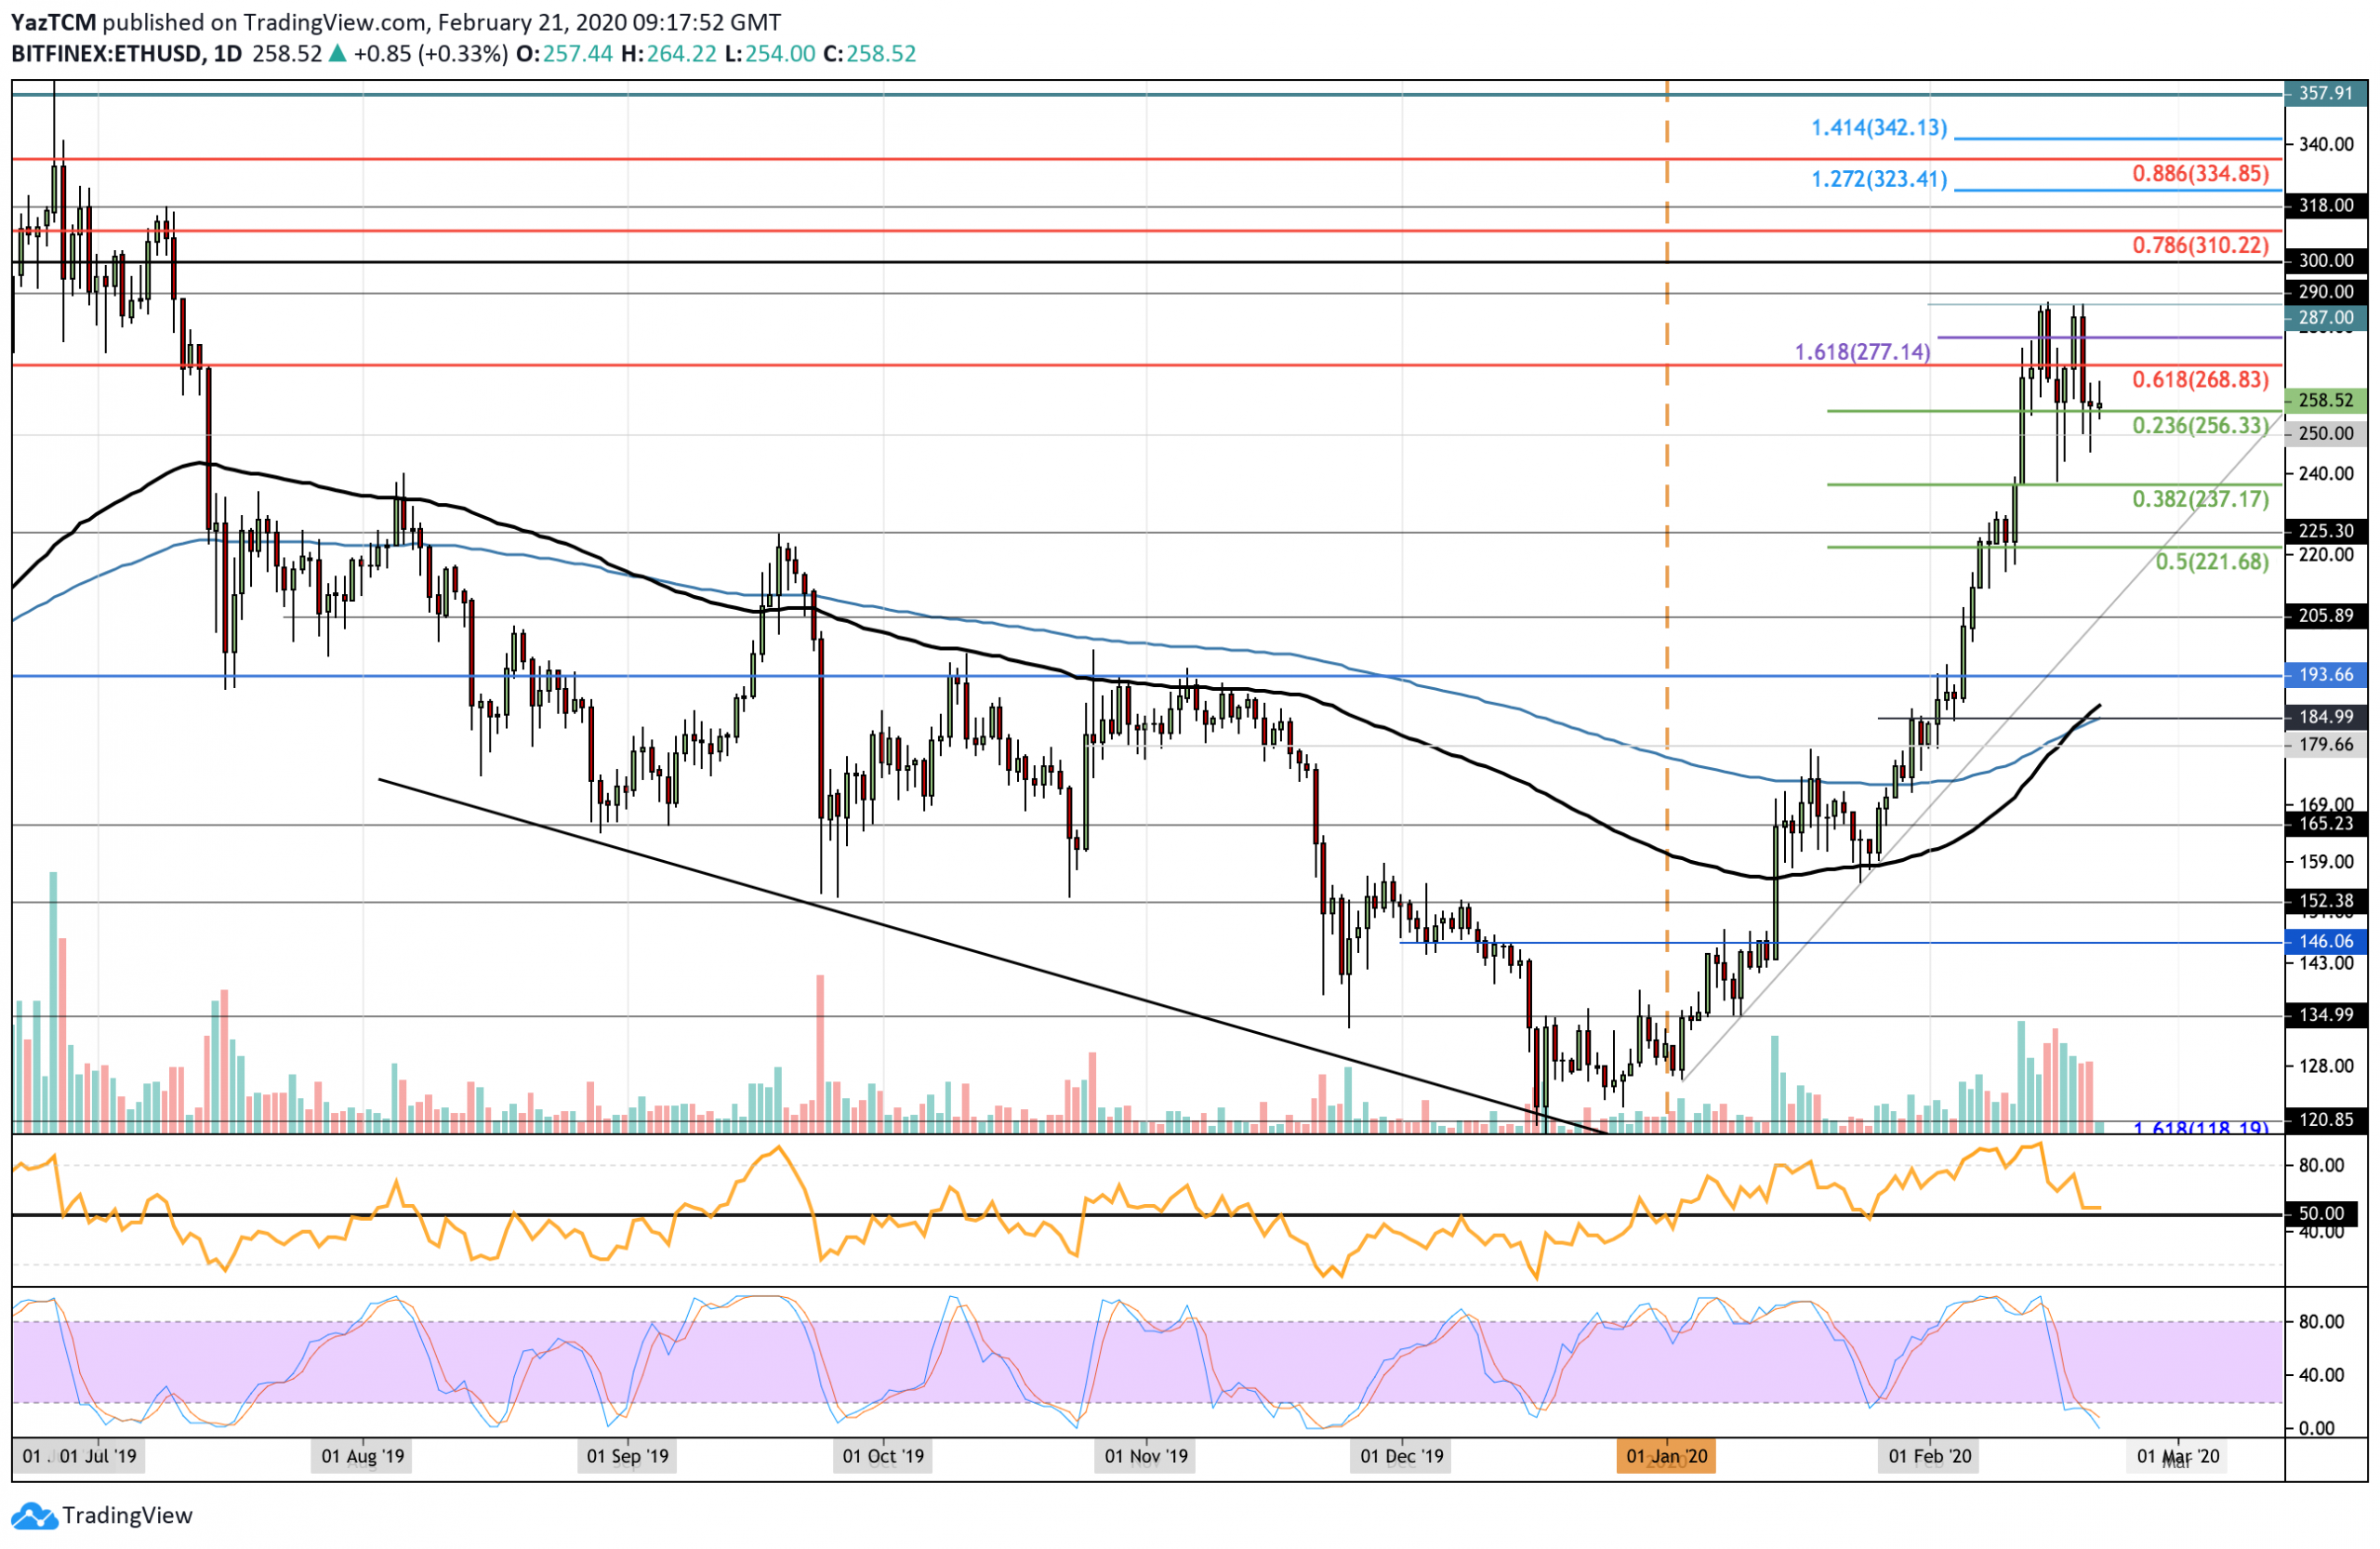 Crypto Price Analysis & Overview February 21st: Bitcoin, Ethereum, Ripple, Tezos, and Binance Coin